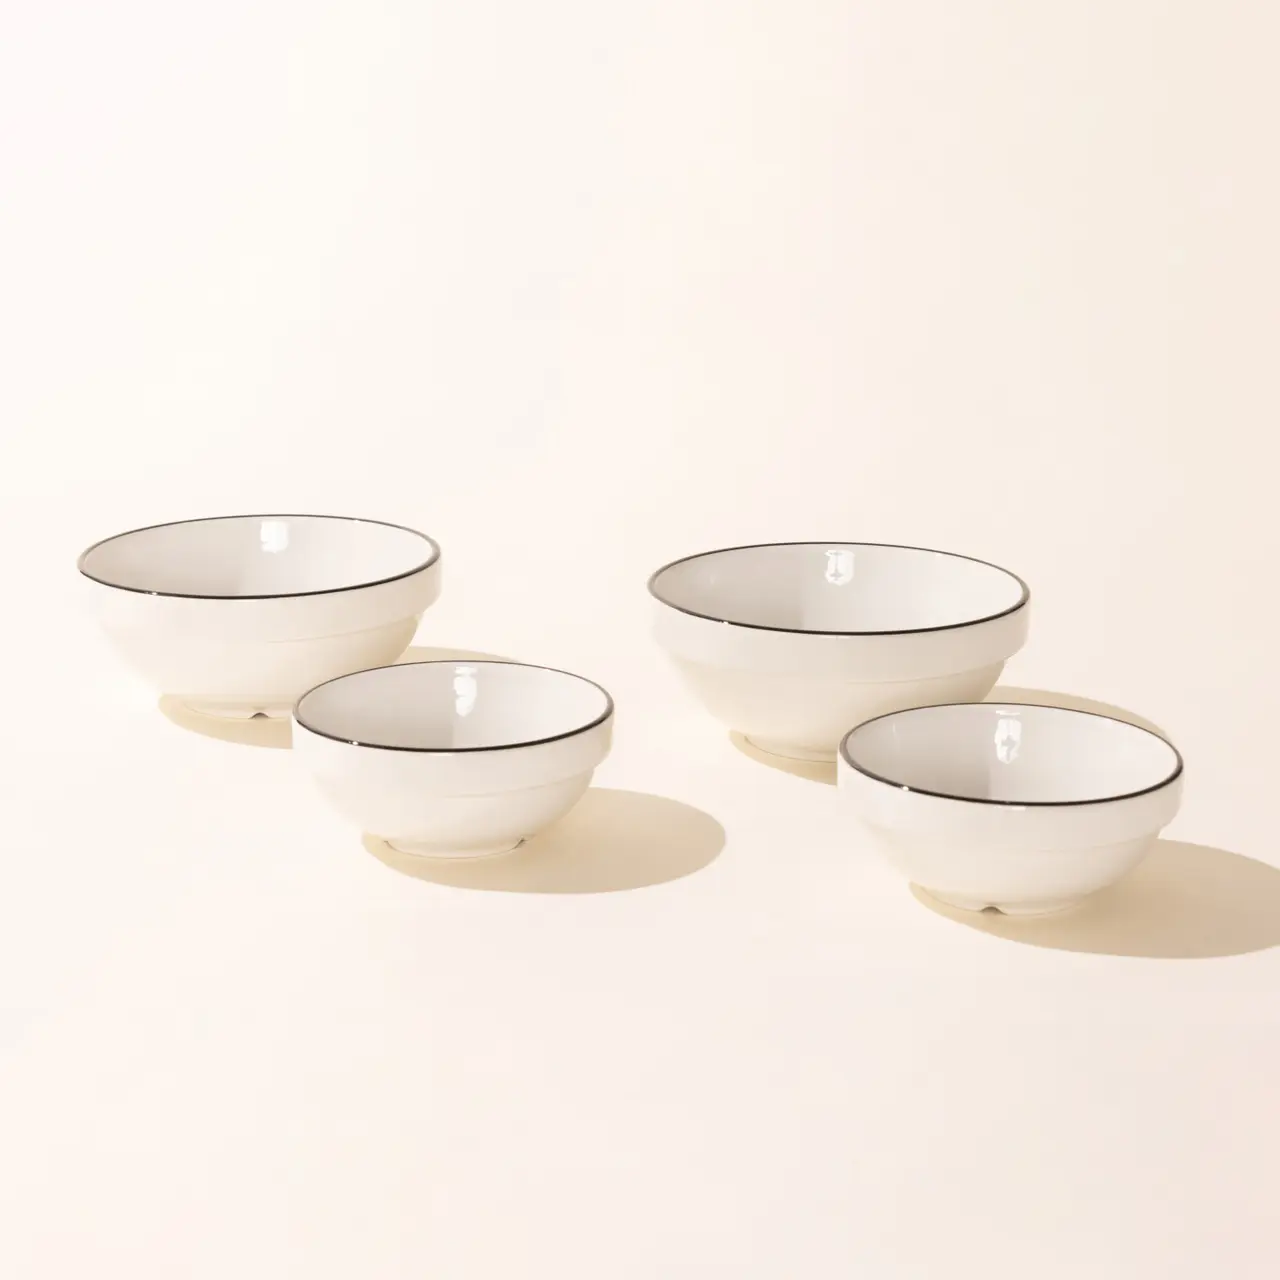 Four white ceramic bowls are arranged in a staggered line against a light beige background.